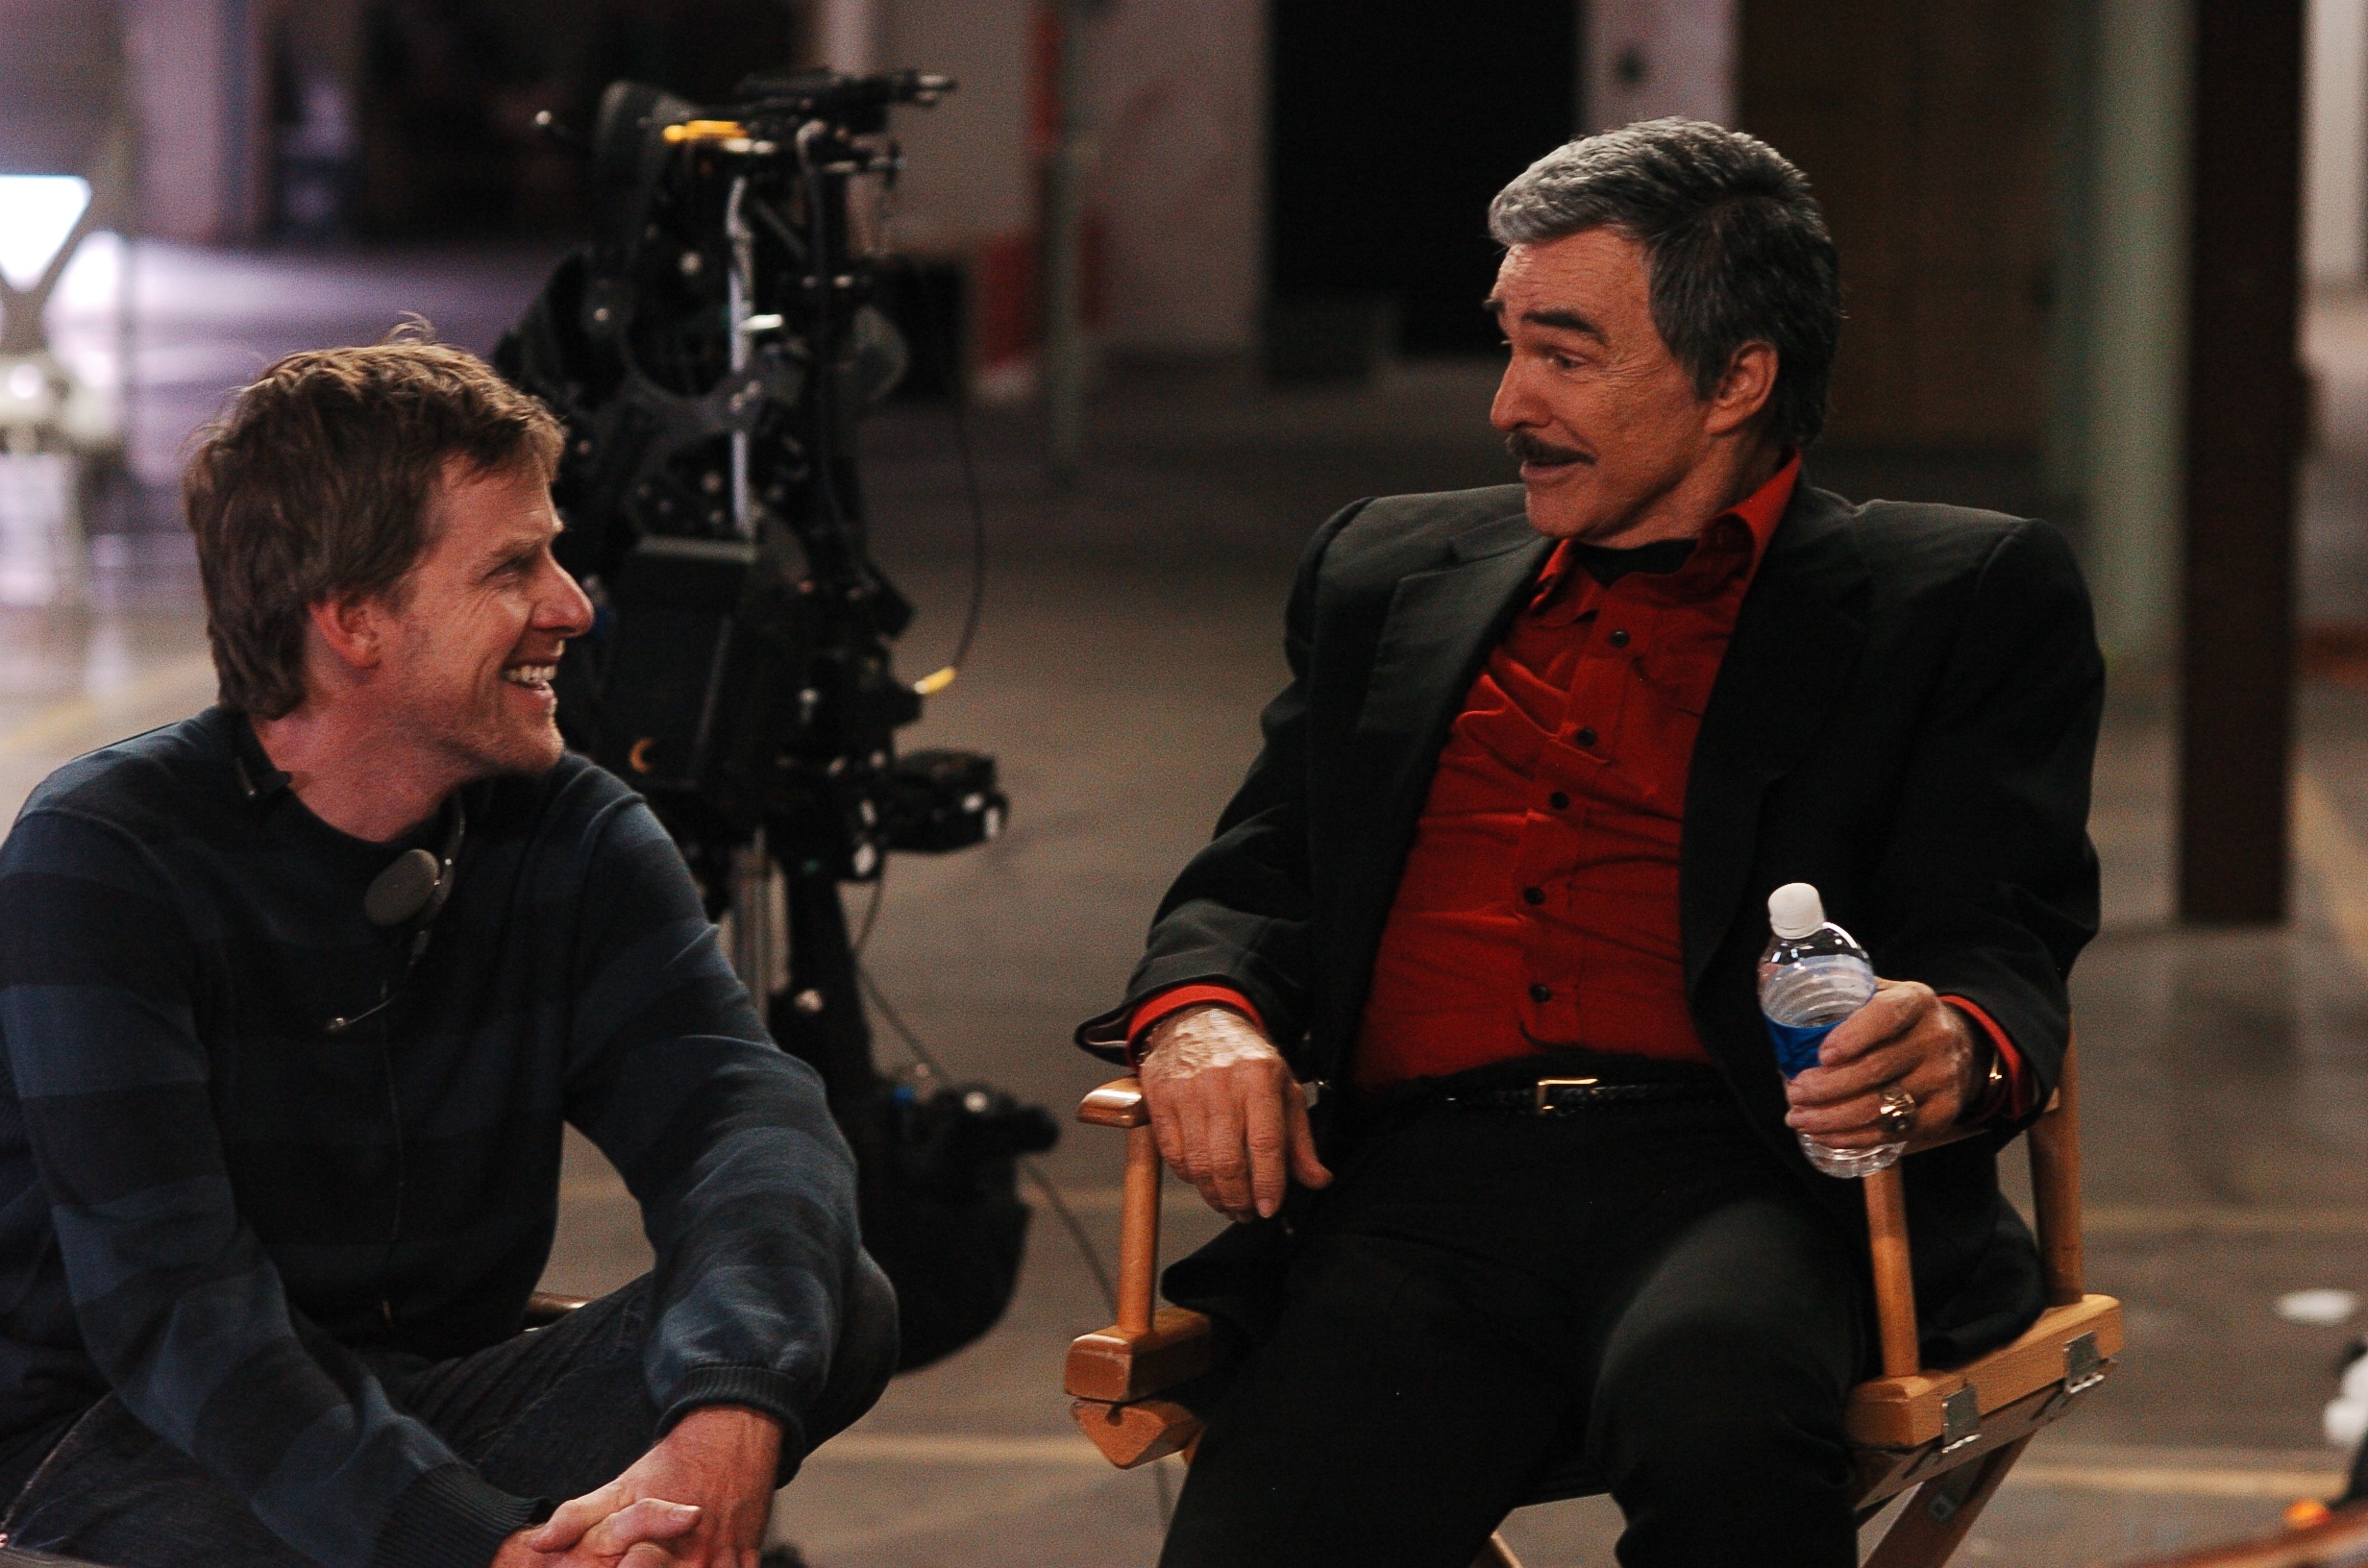 Declan Joyce and Burt Reynolds on the set of 'Not Another Not Another Movie'.